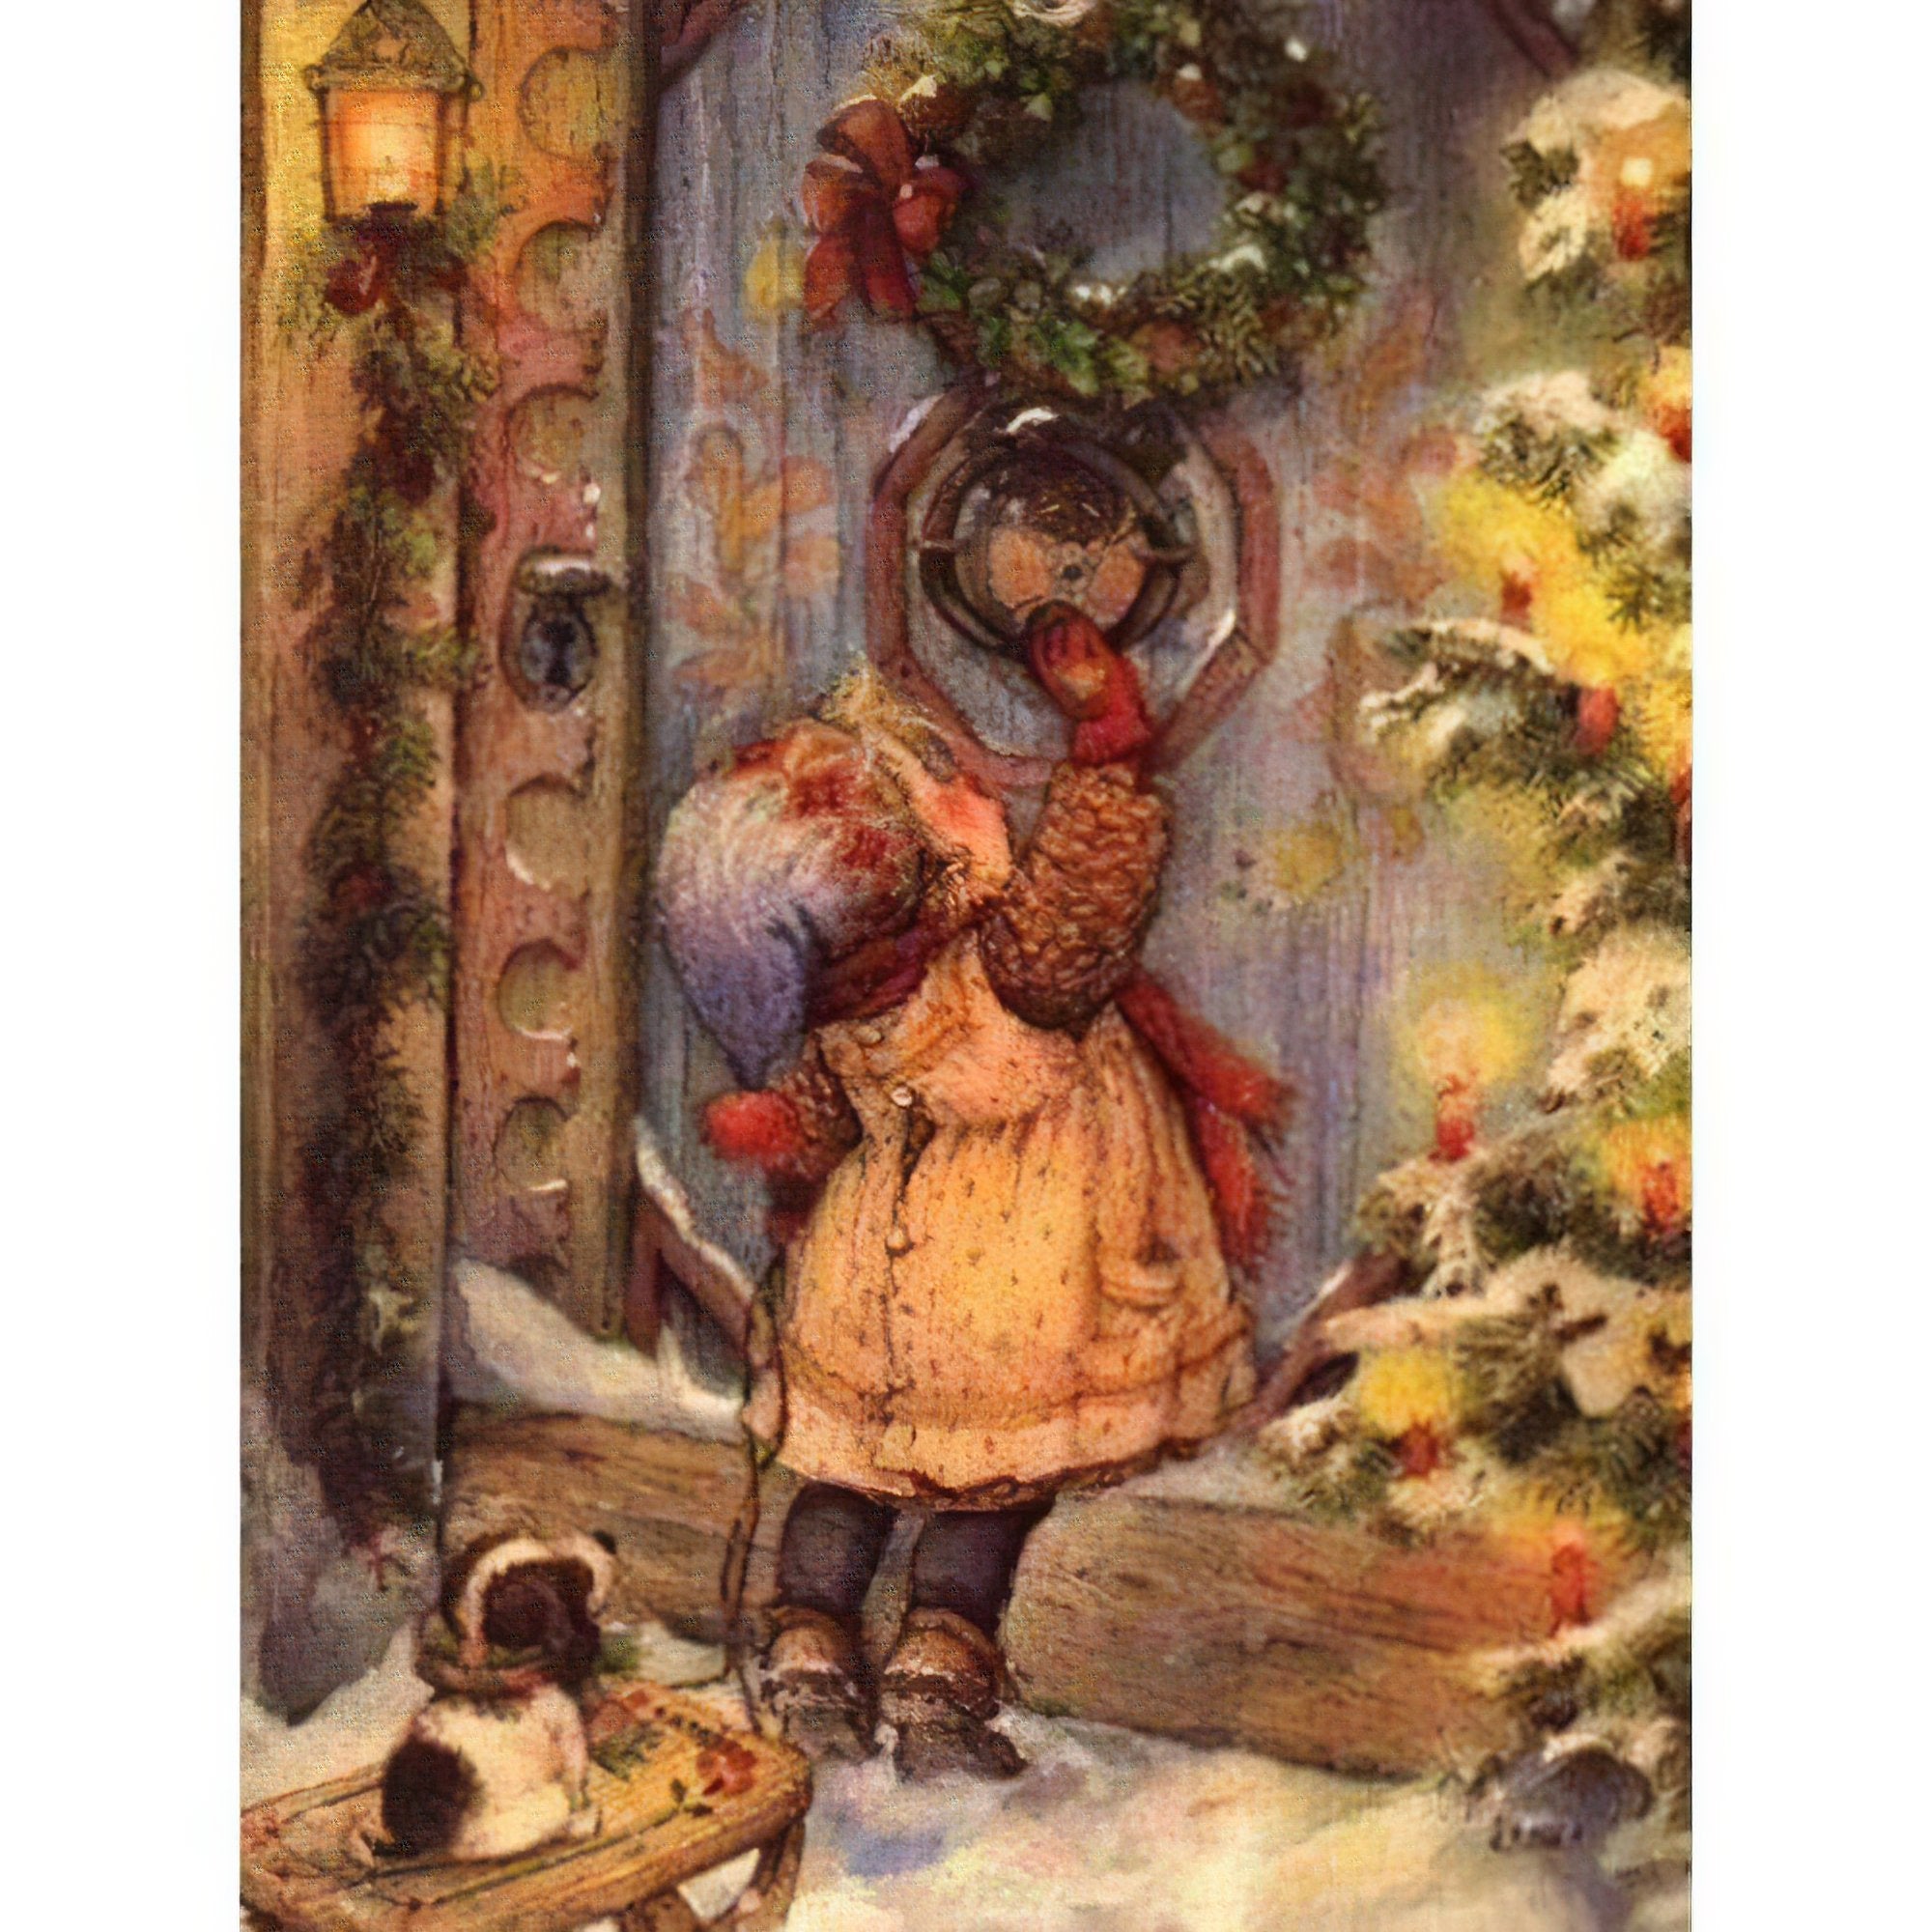 Cherish joy and friendship of a girl and her puppy in holiday bliss.Christmas Little Puppy And Little Girl - Diamondartlove